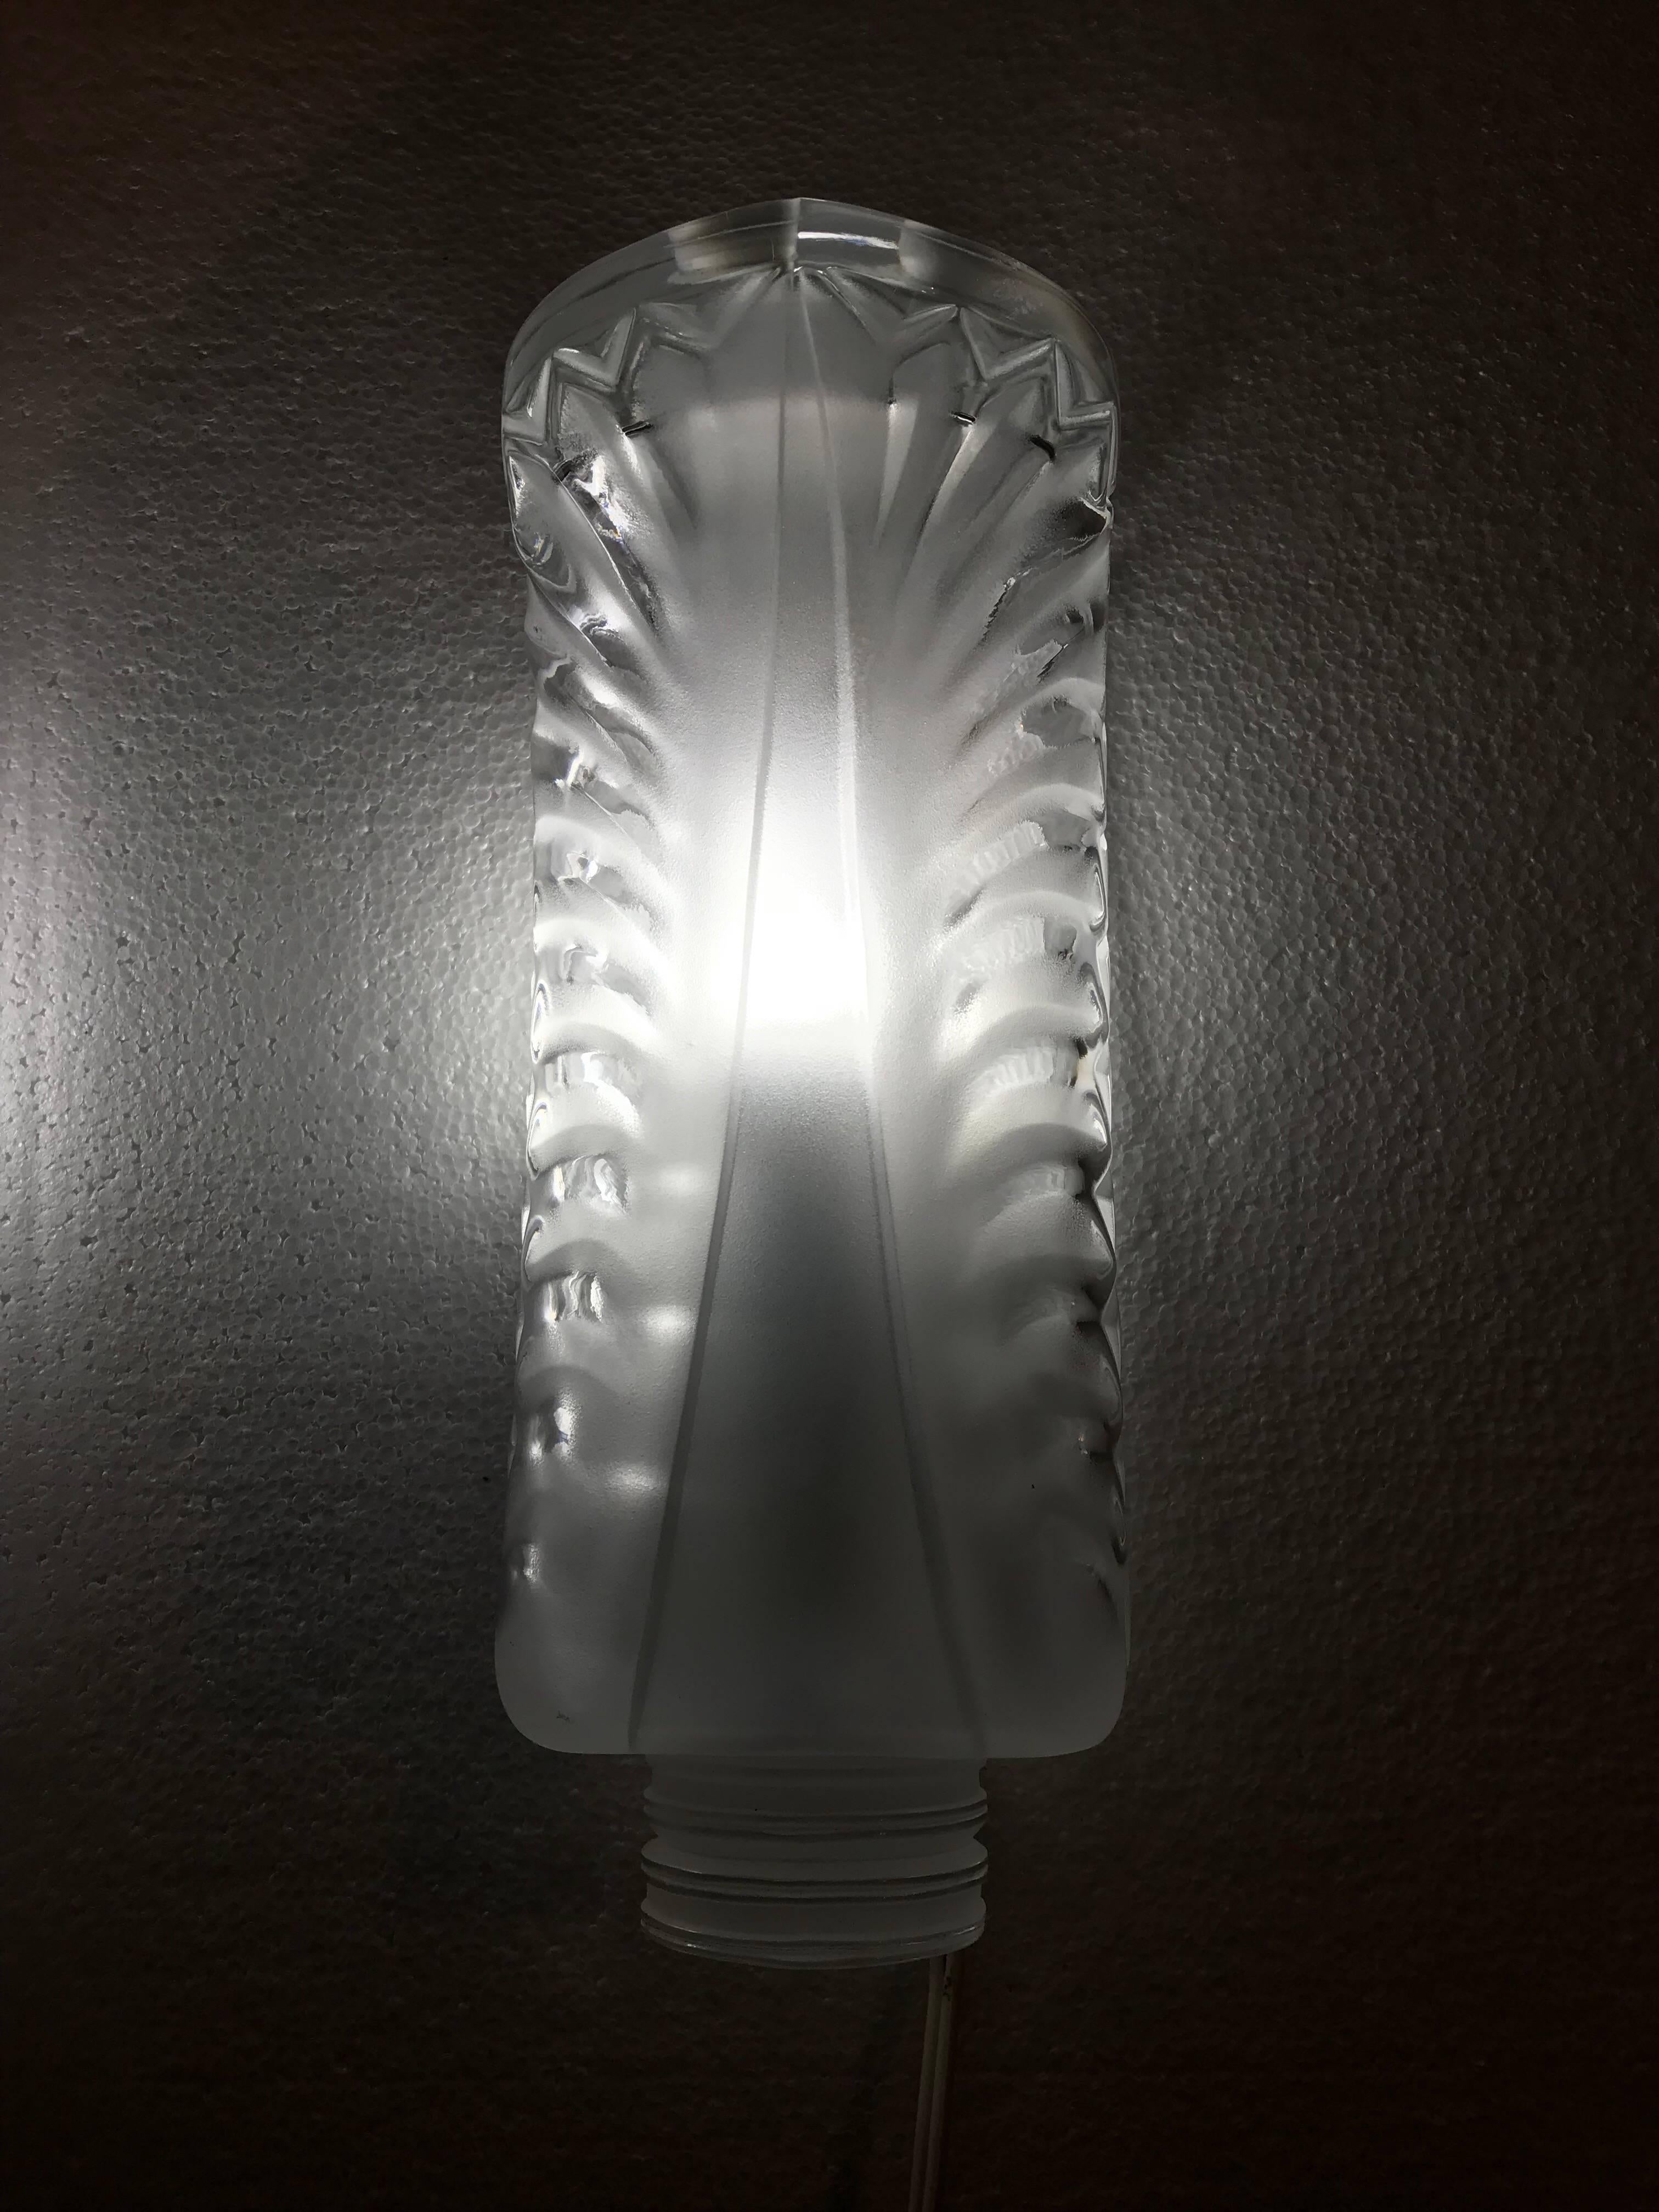 Pair of Lalique sconces in clear and frosted glass in a classical Lalique Art Deco design.